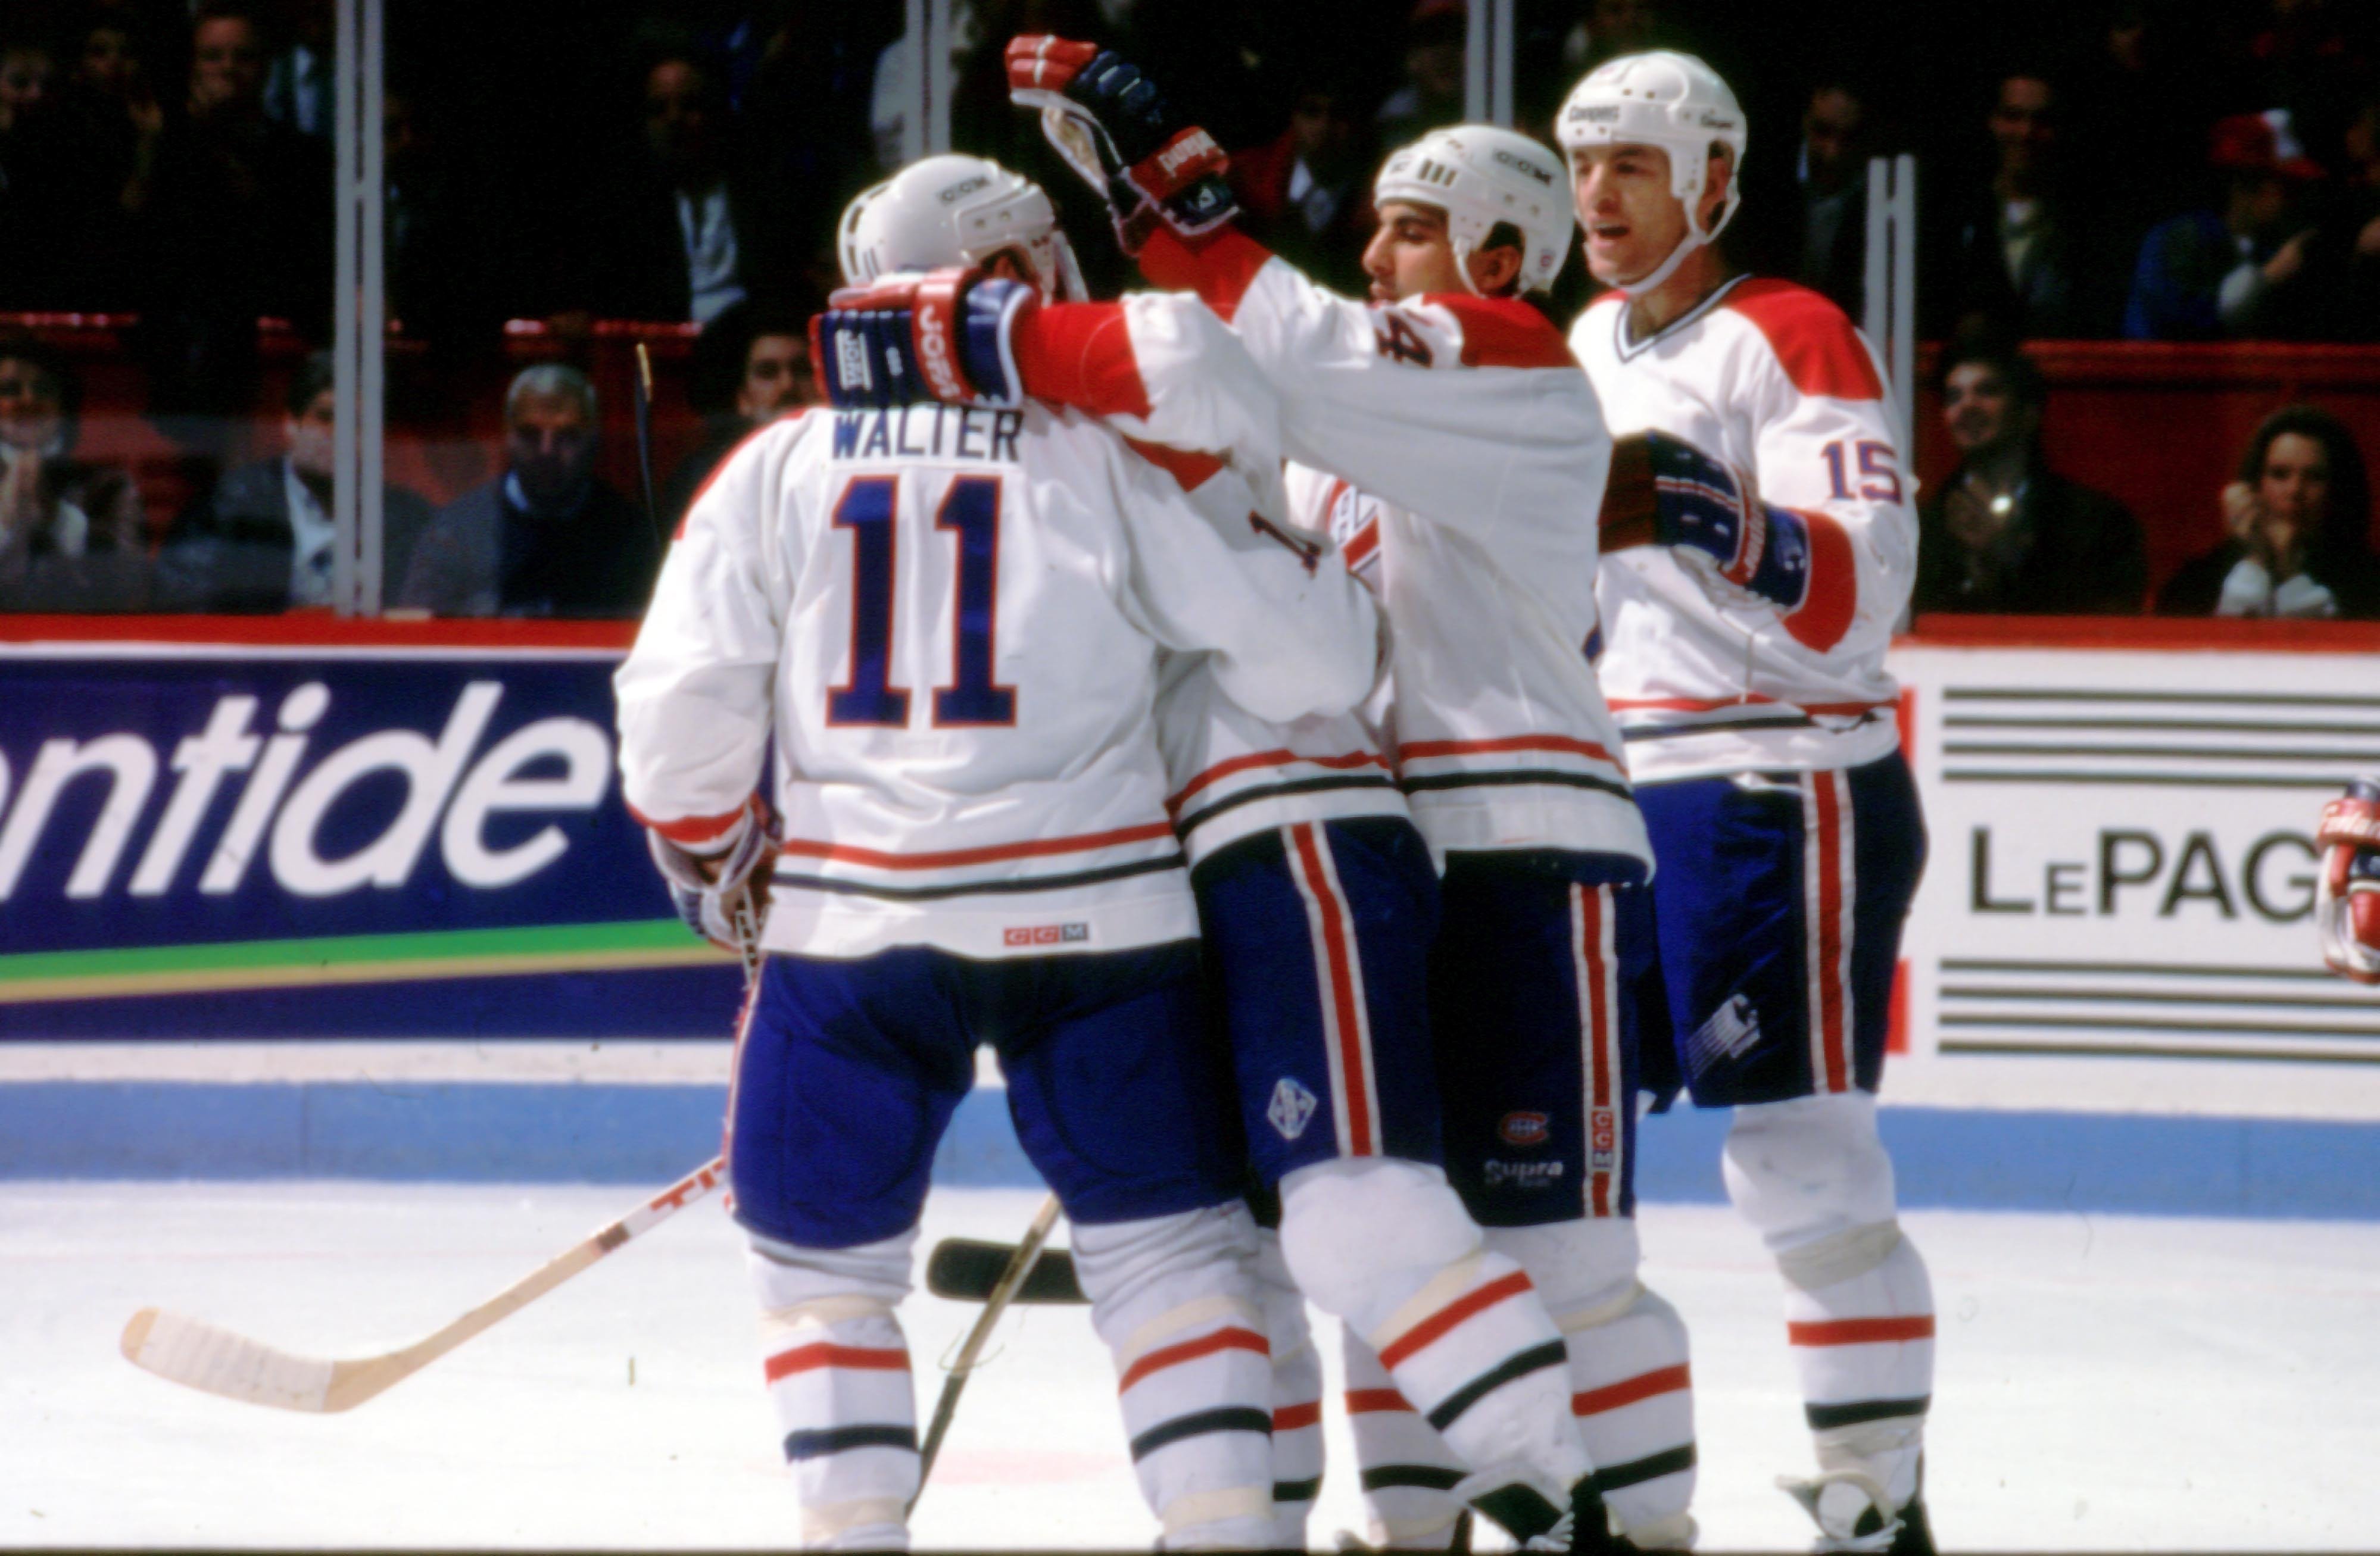 Celebrating the Overtime Win in the 1989 Stanley Cup Finals.